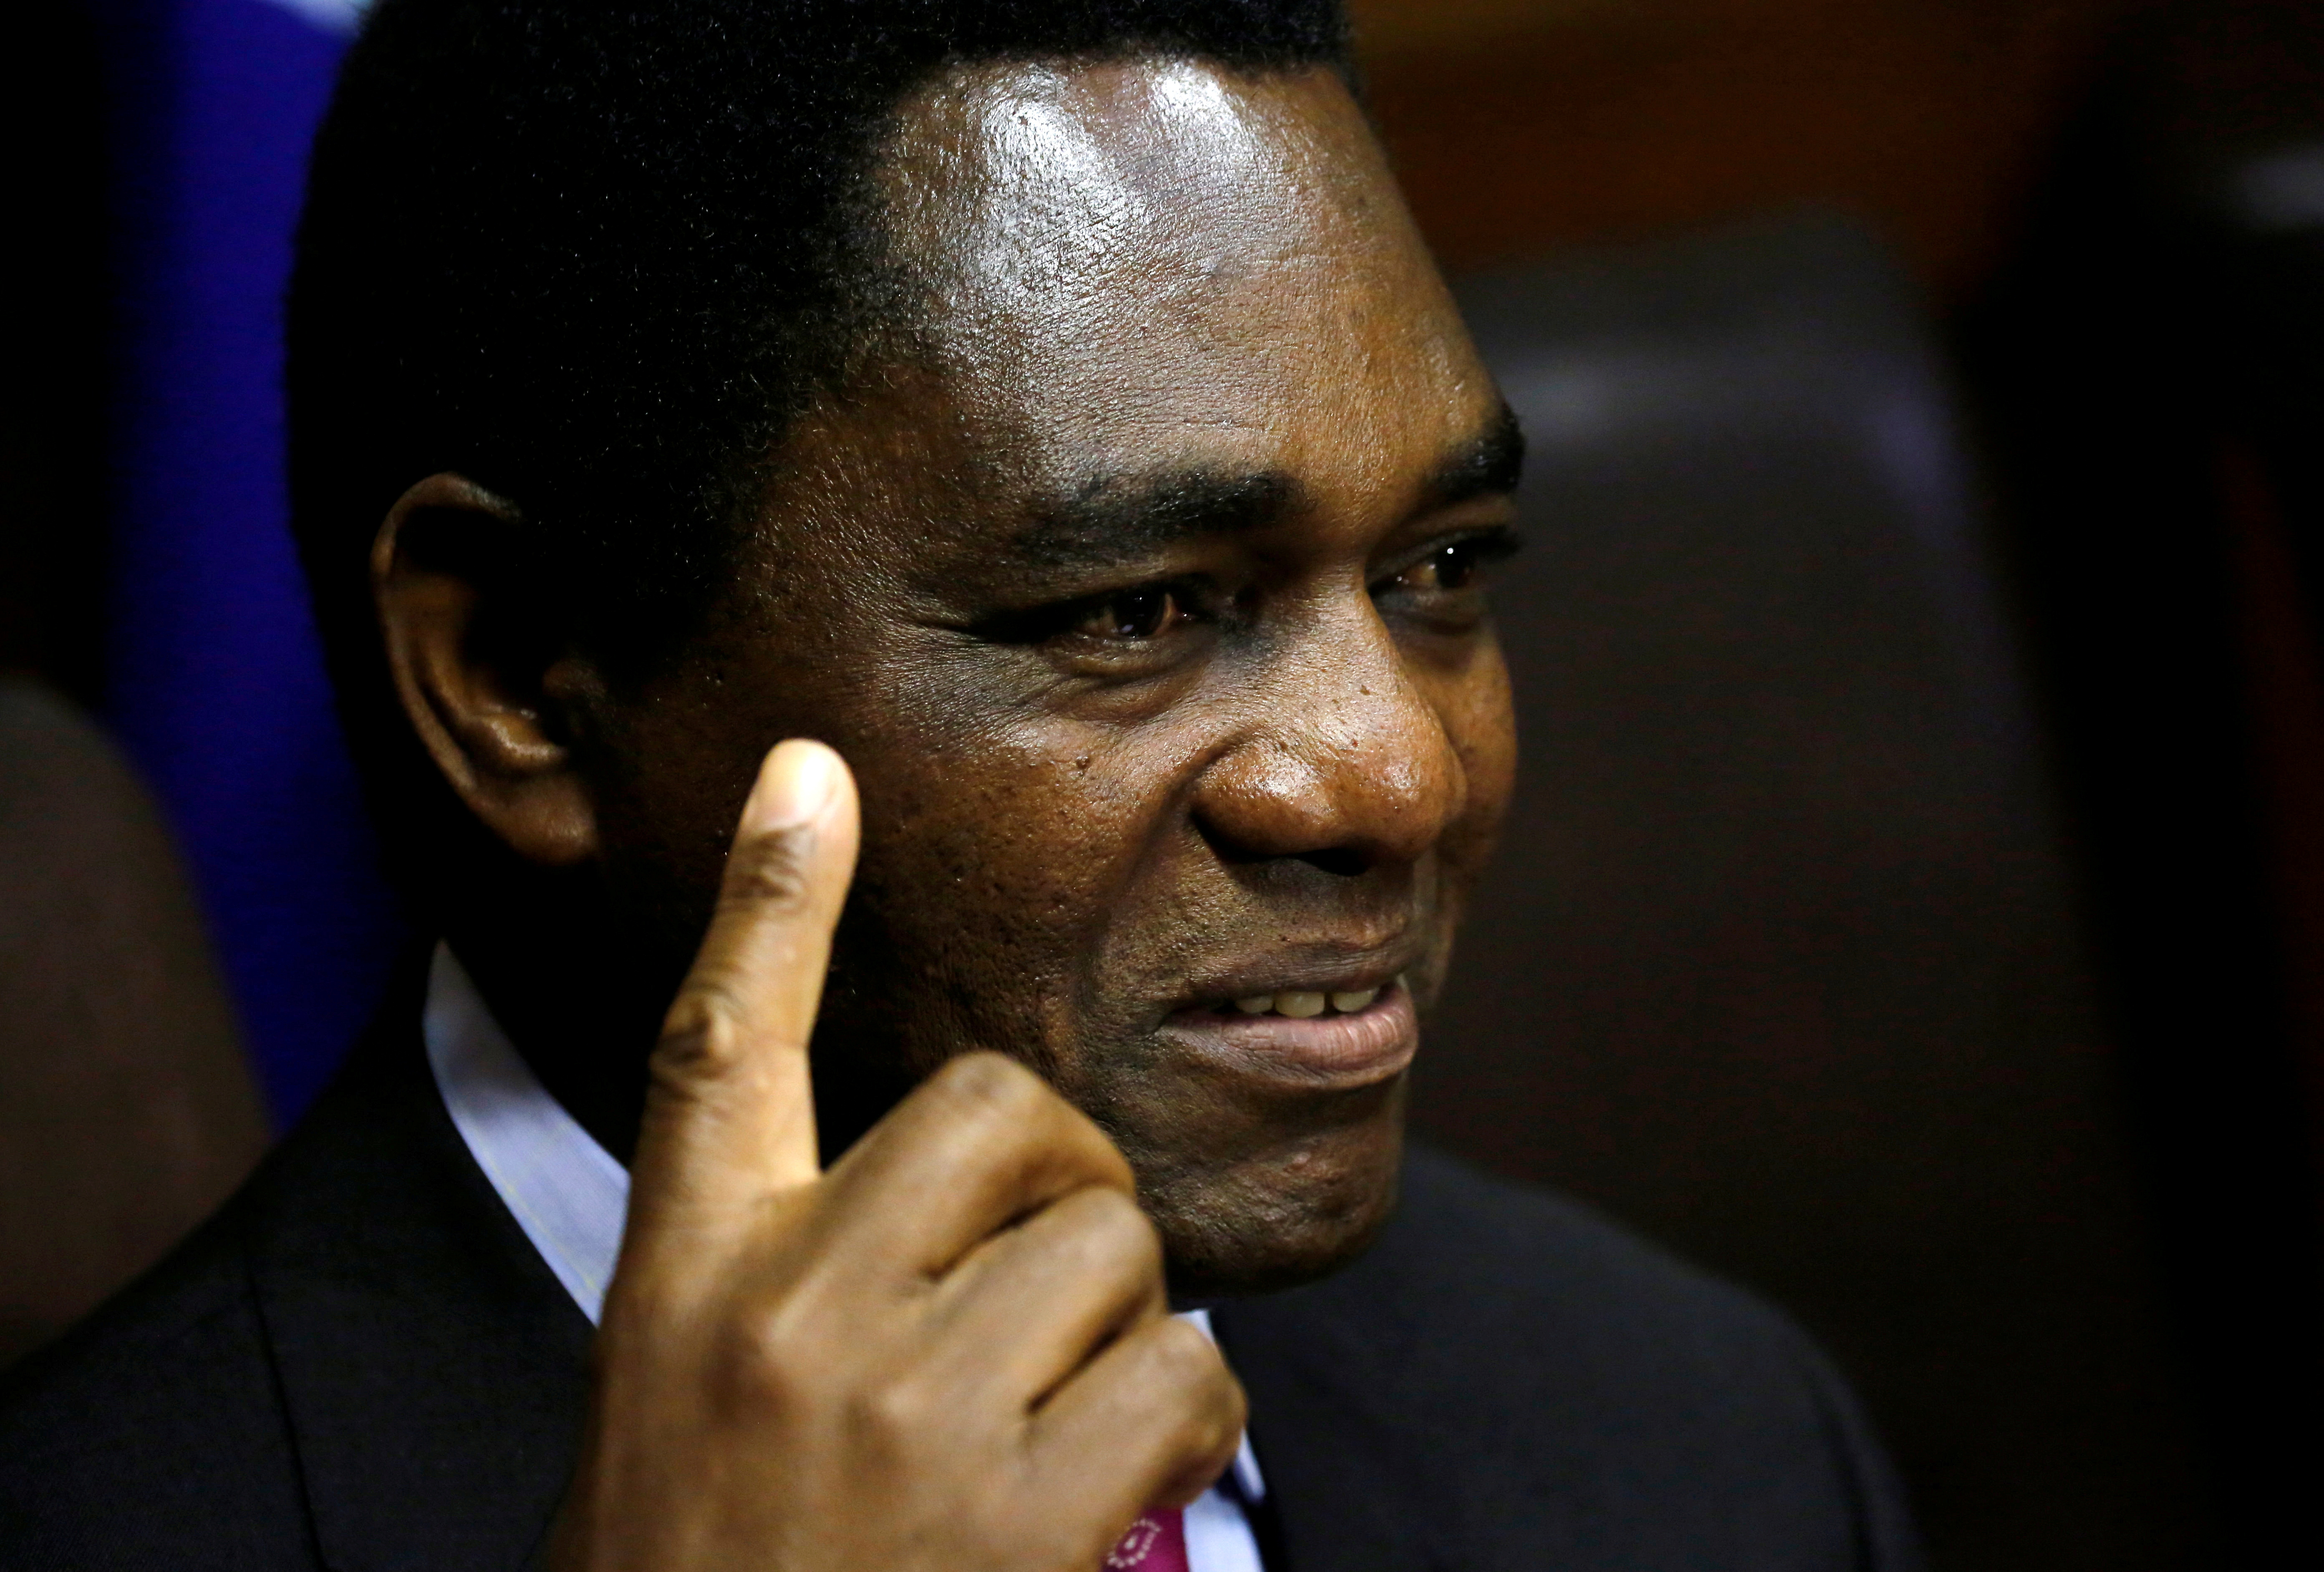 Hakainde Hichilema, leader of ZambiaÕs opposition United Party for National Development (UPND), addresses a media conference in Cape Town